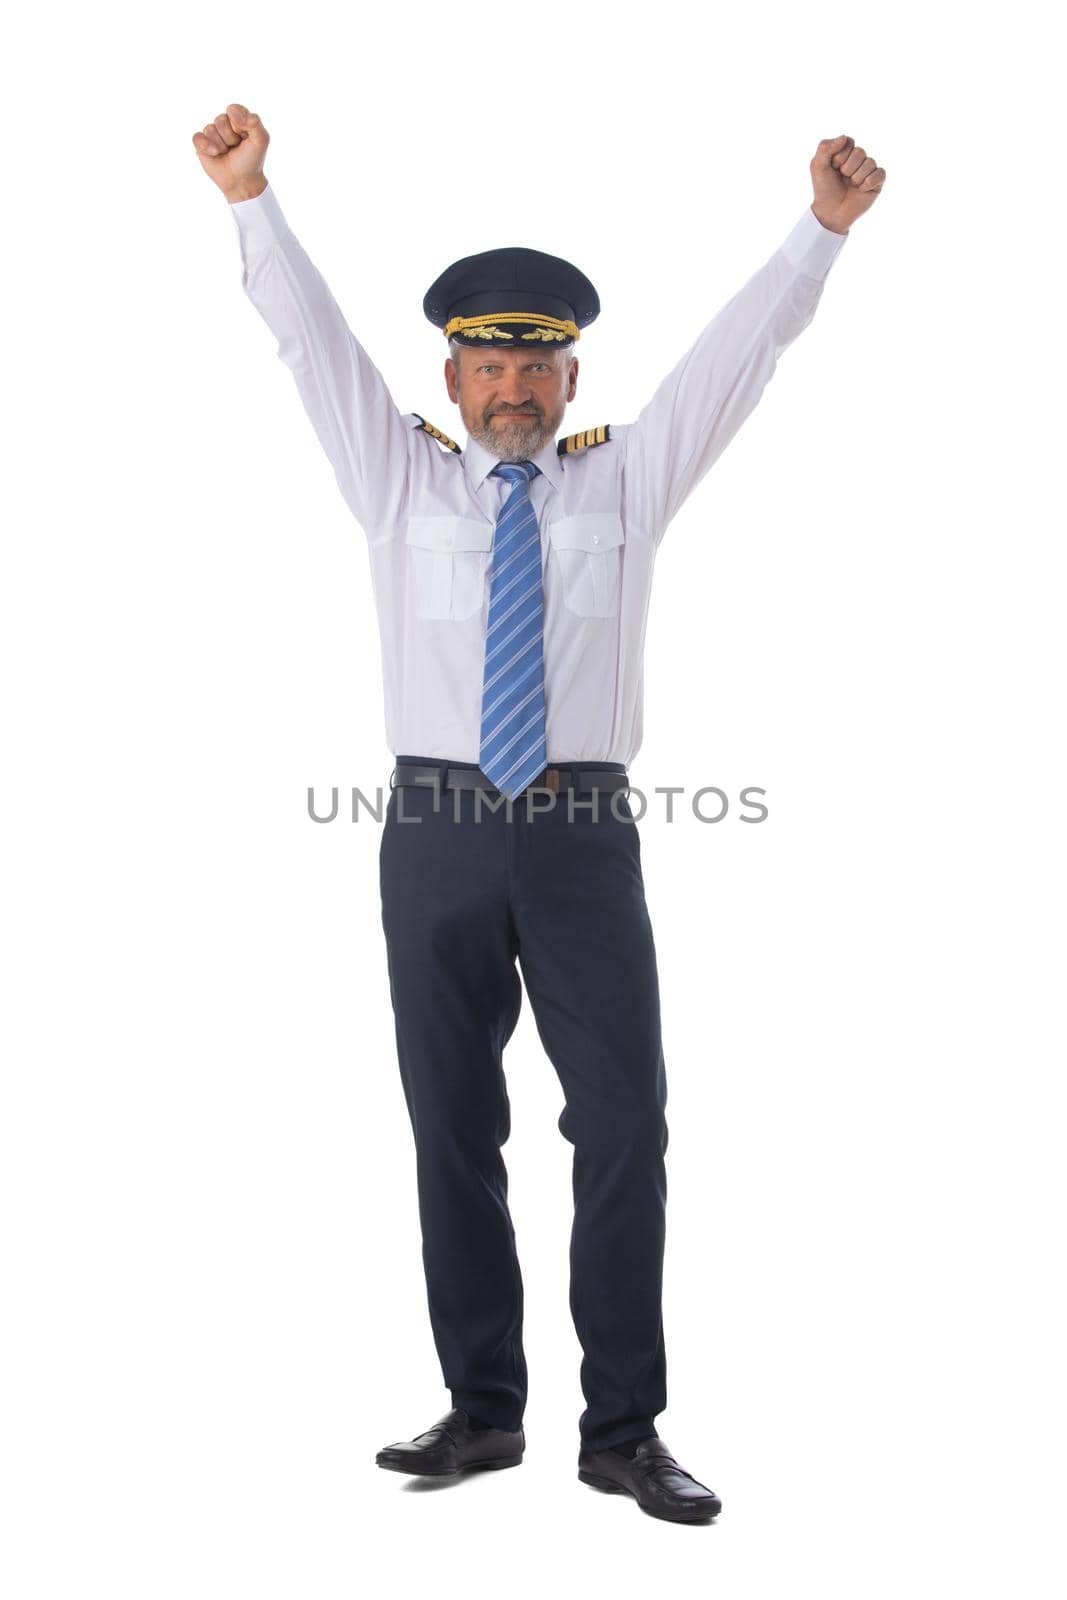 Airline pilot with arms raised by ALotOfPeople